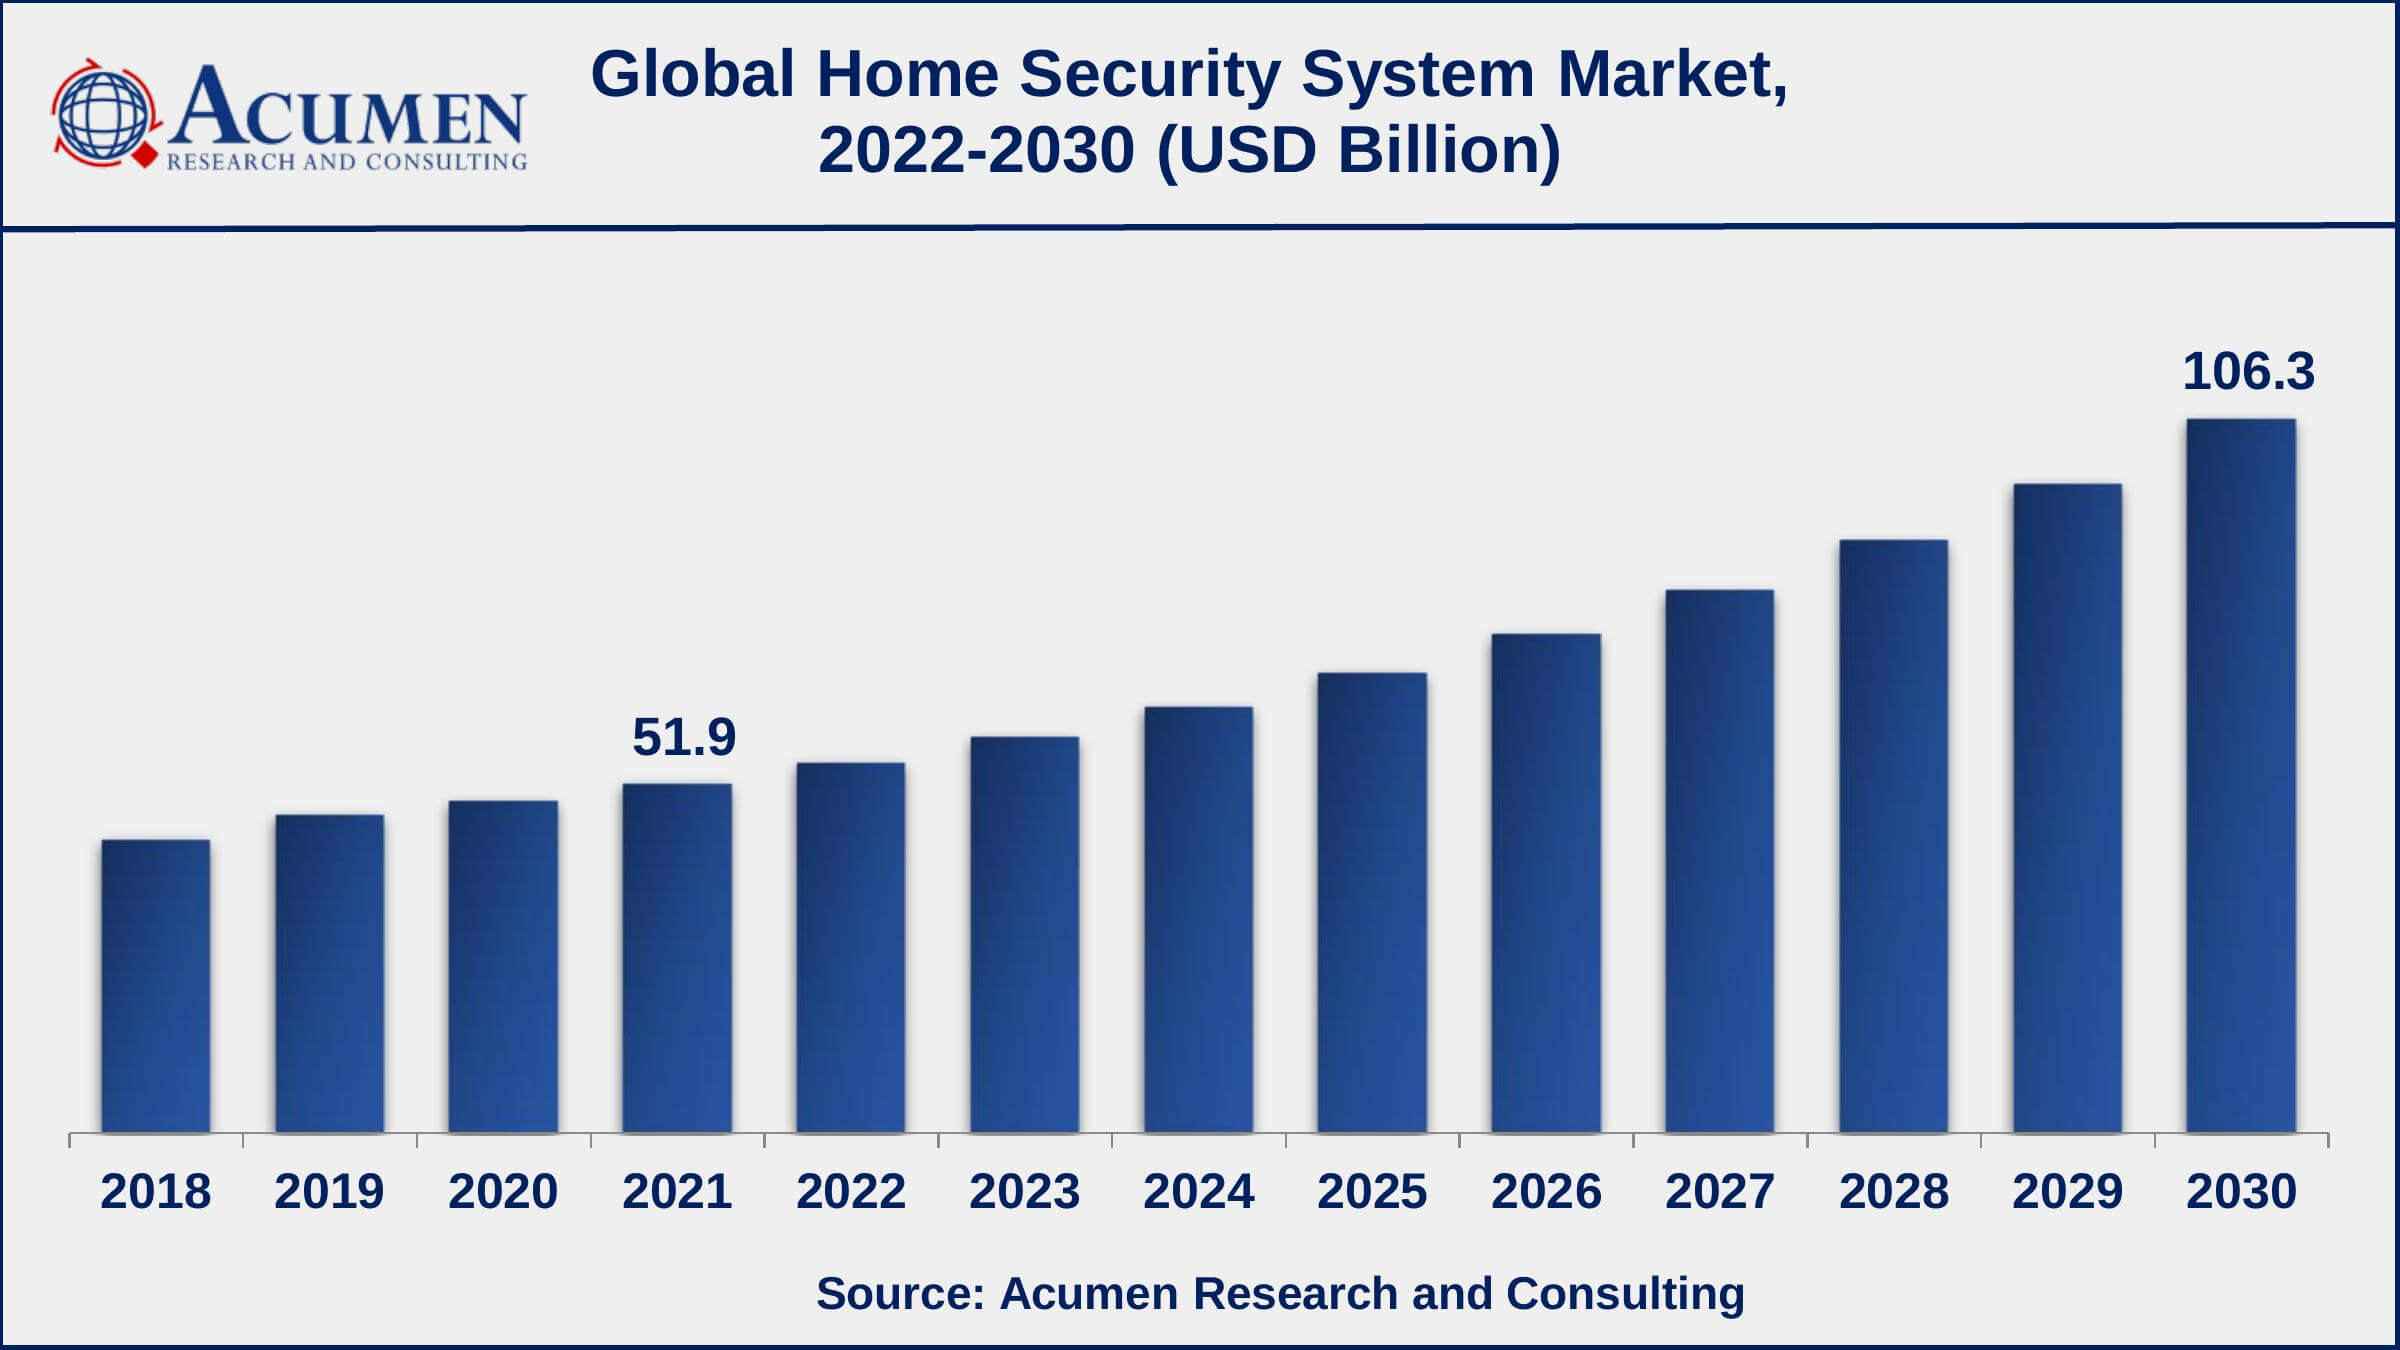 Asia-Pacific home security system market growth will record a CAGR of more than 9% from 2022 to 2030